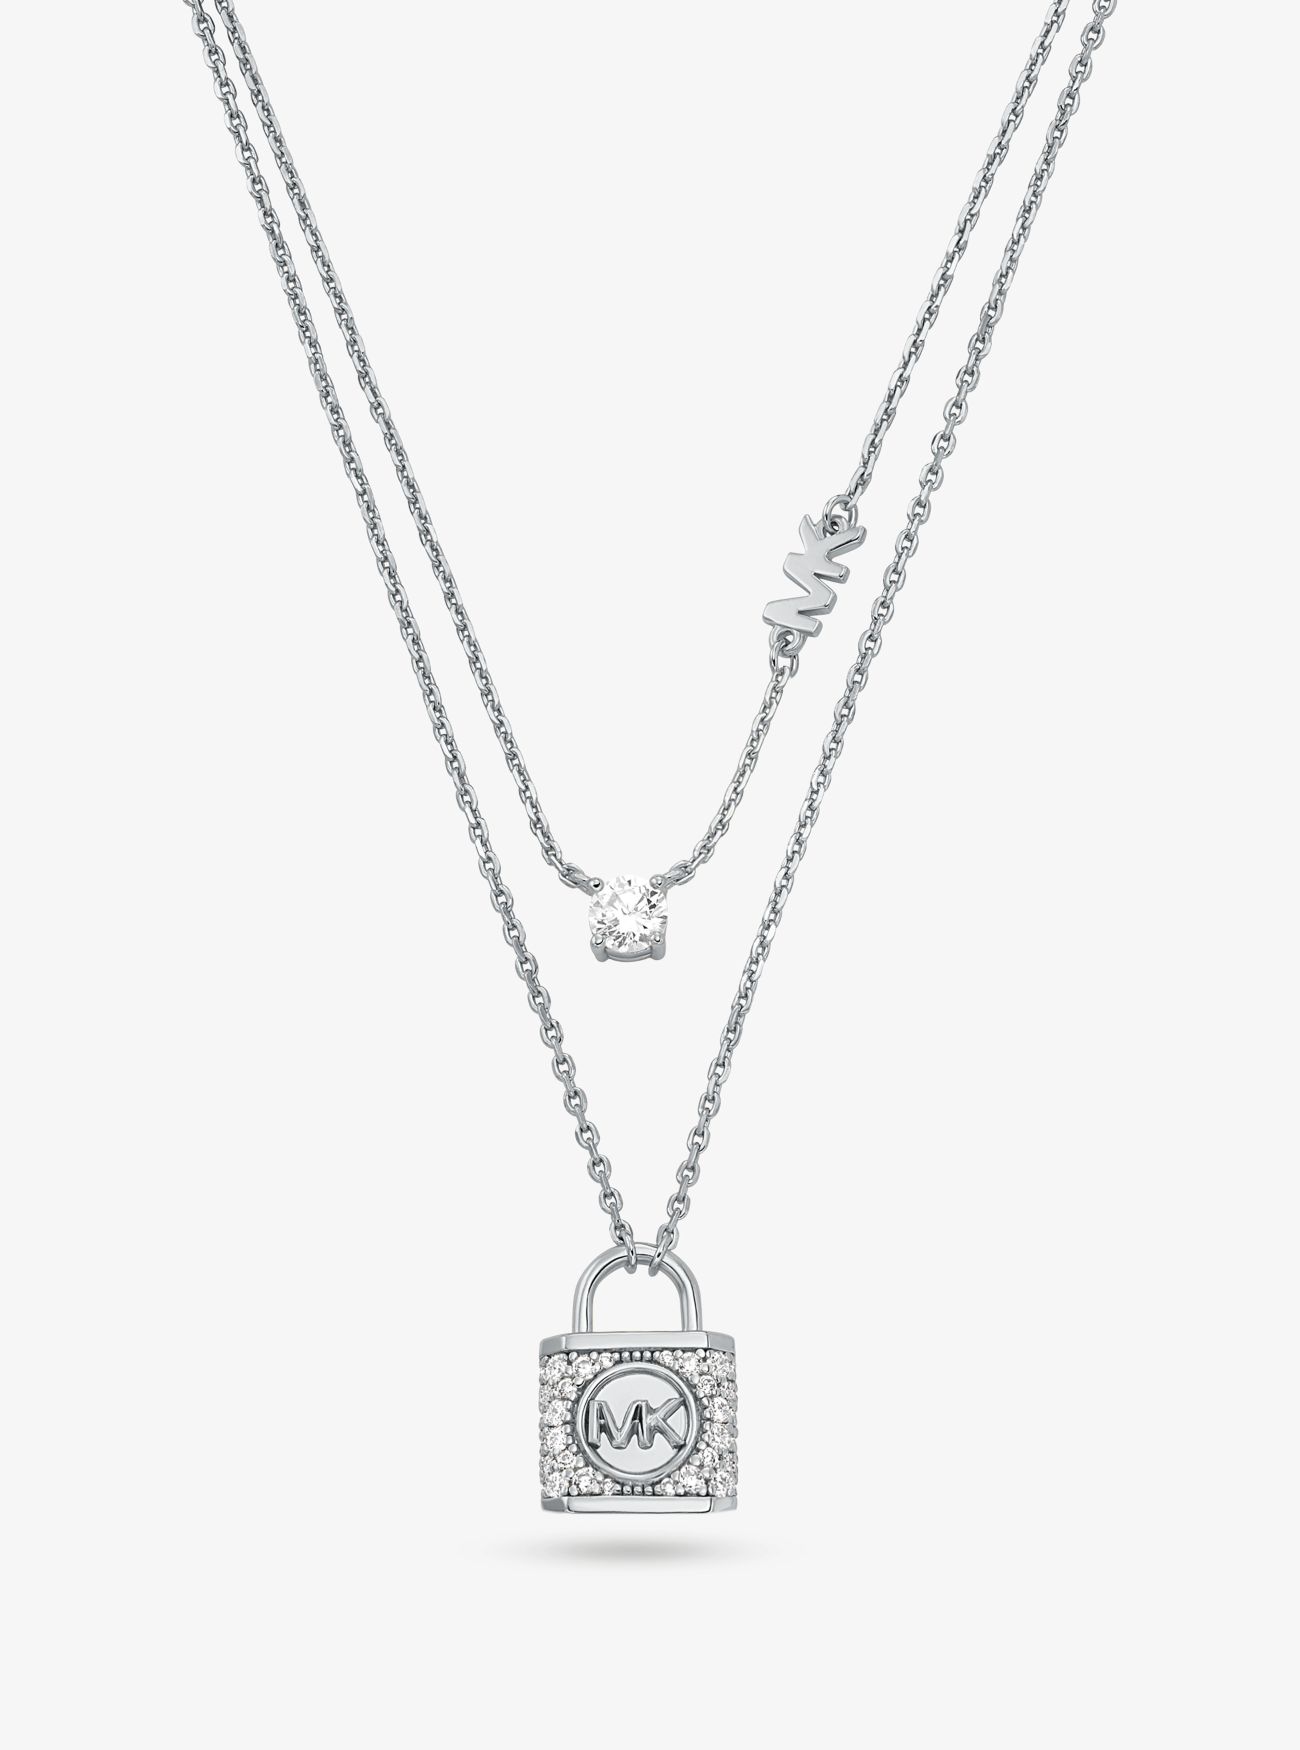 MK Precious Metal-Plated Sterling Silver PavÃ© Lock Layered Necklace - Grey - Michael Kors